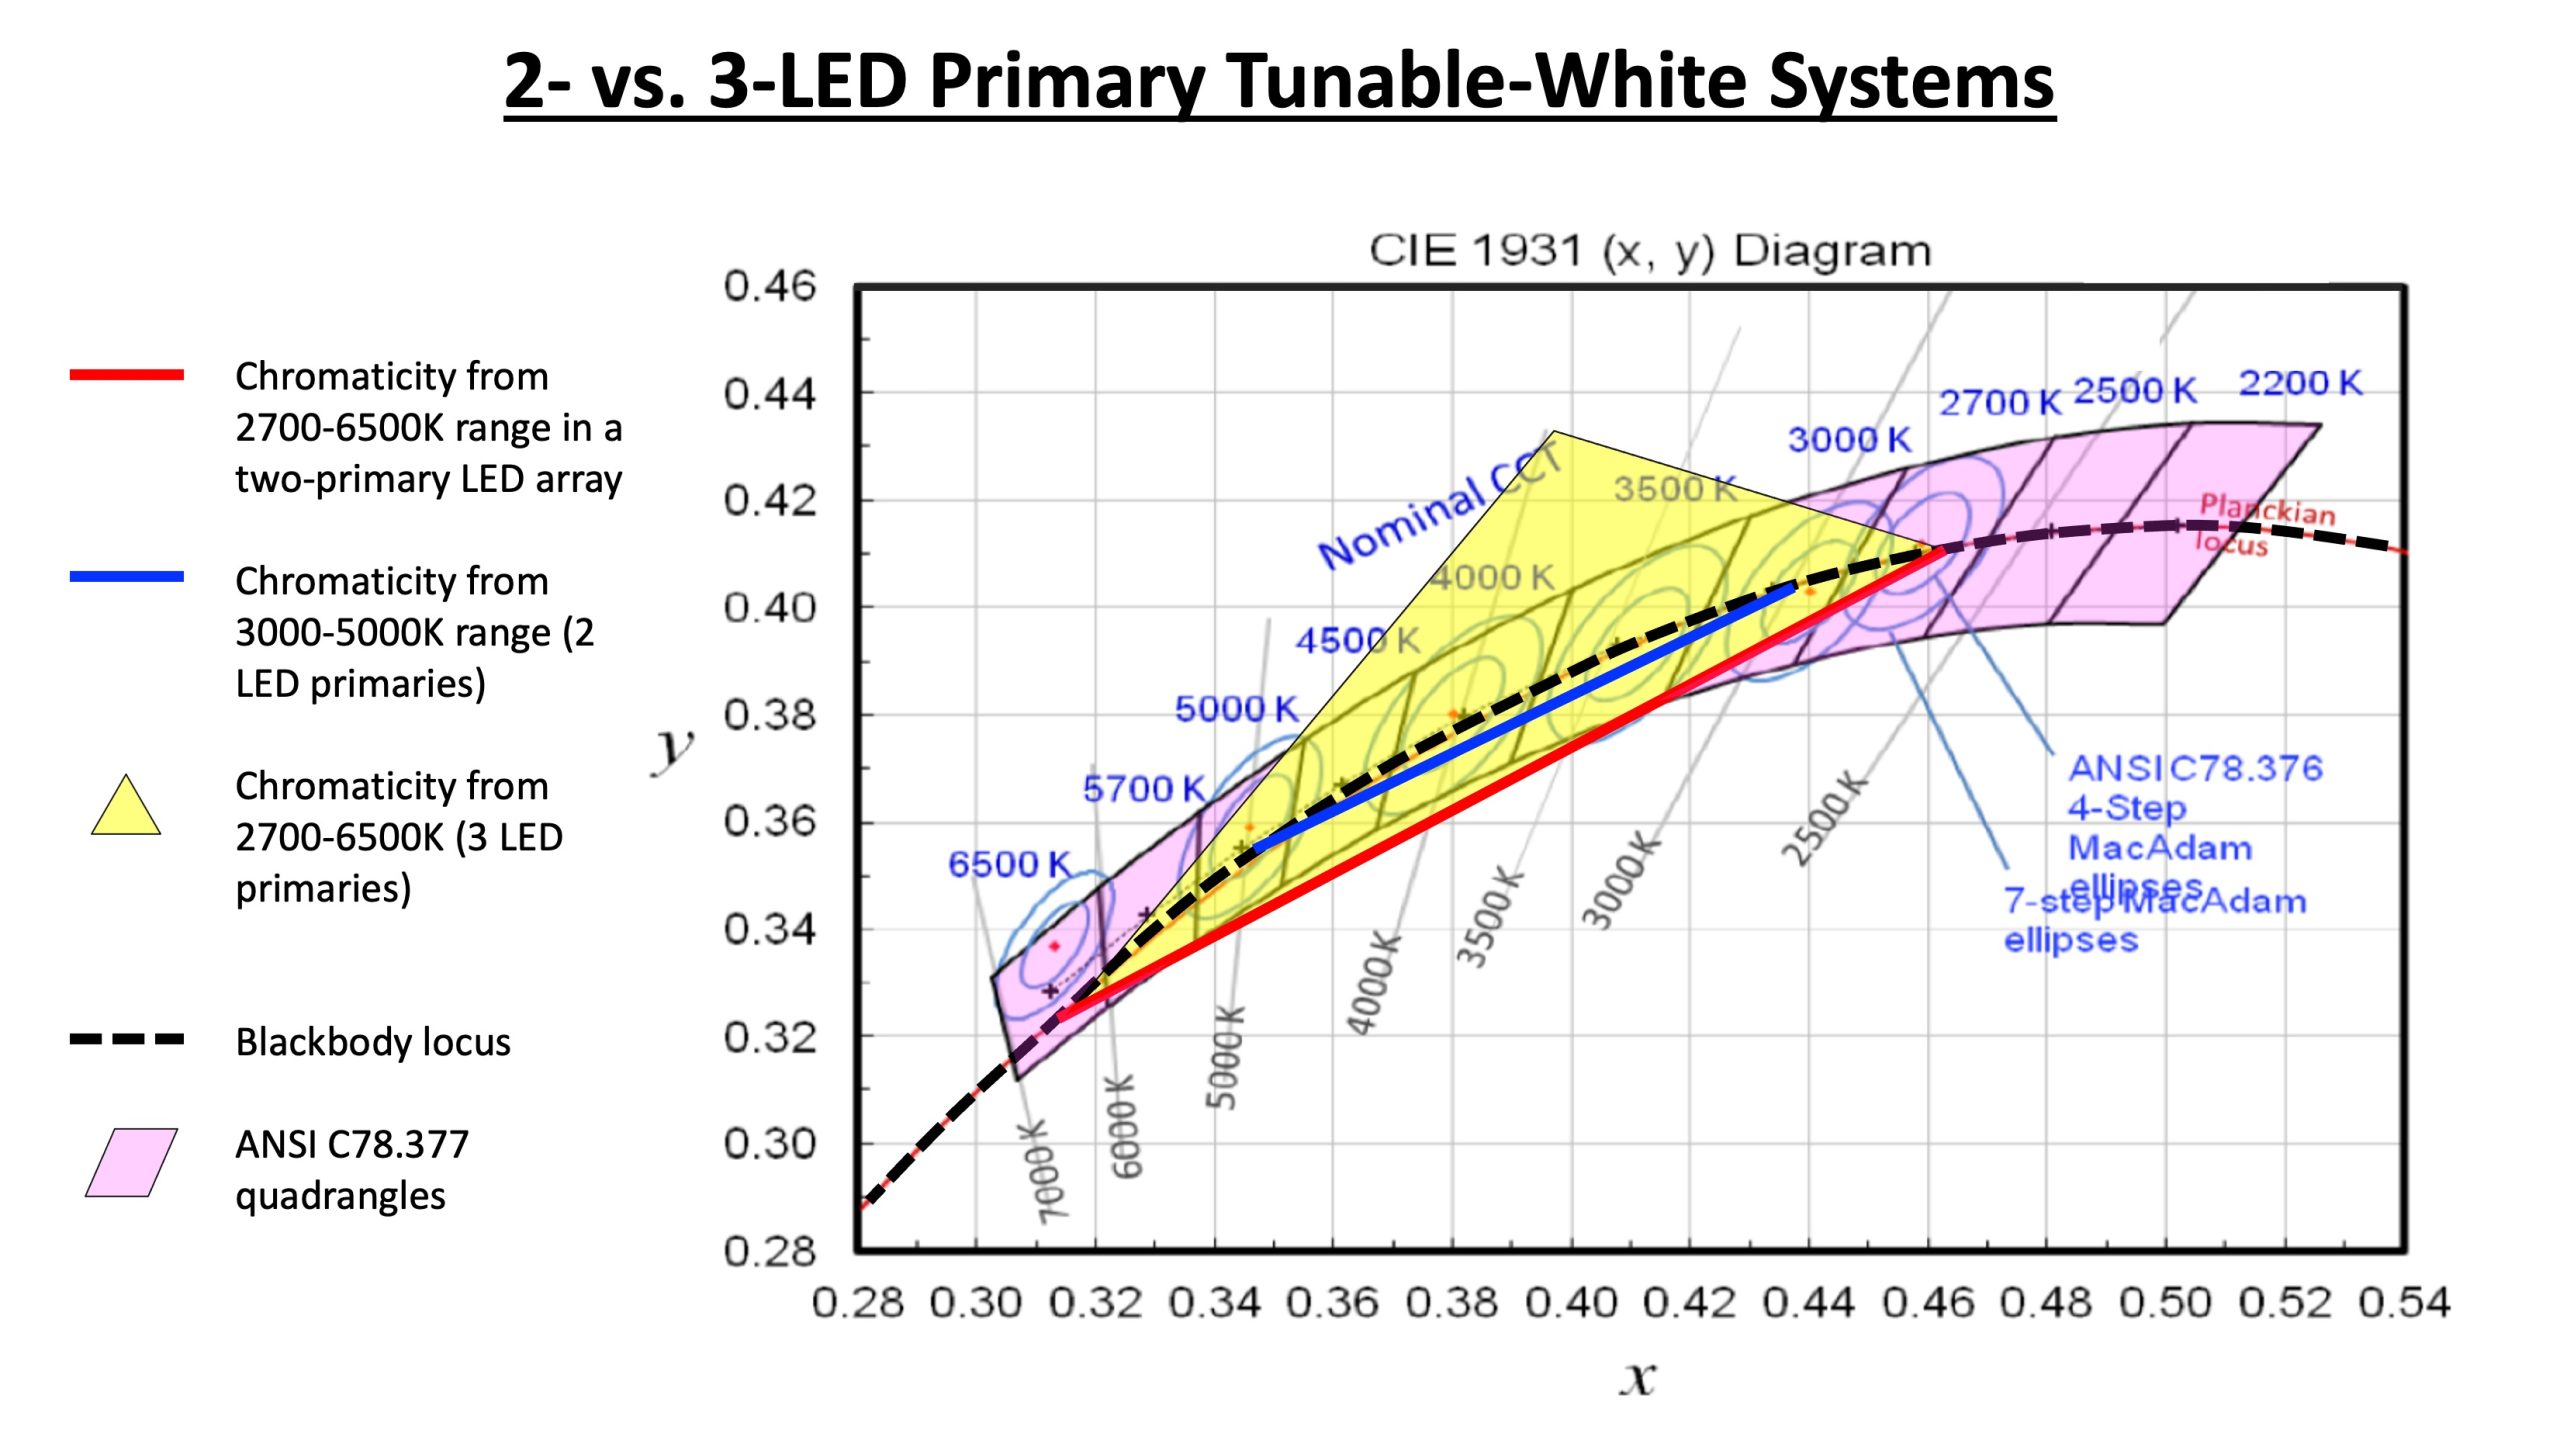 Graph of 2- vs. 3-LED Primary Tunable-White Systems